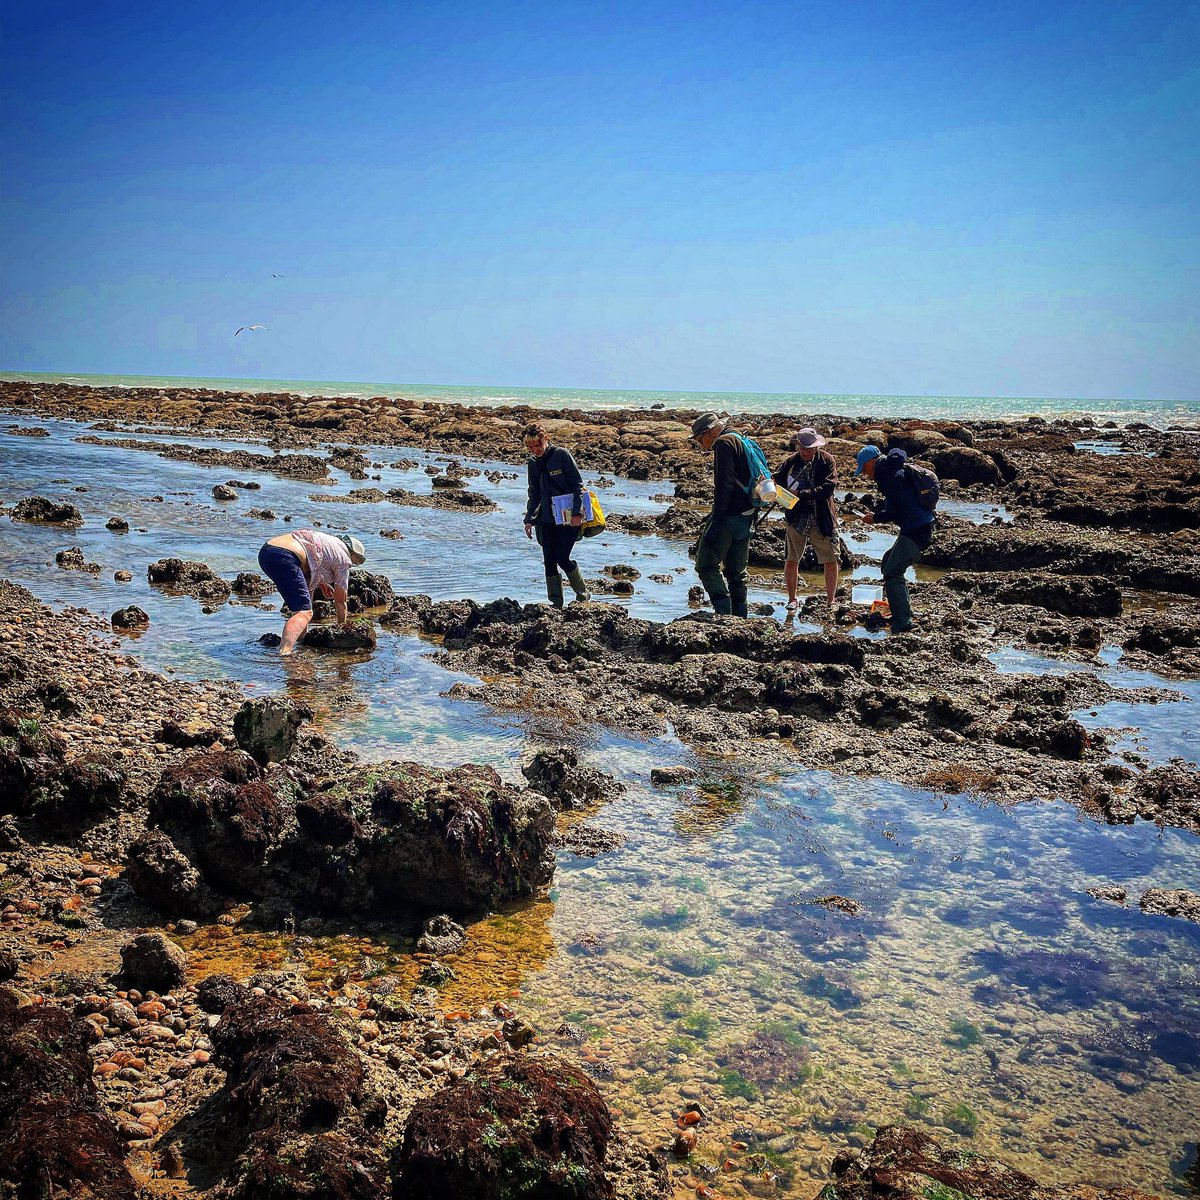 Loved being out with #shoresearch volunteers surveying the #intertidal on Day 9 of #30DaysWild! ☺️ Nothing better than enjoying nature with other enthusiasts ☀️🐙🪼🦐🦀🐟🪸🐌🌊

#citizenscience #eastbourne #rockyshore #beachyheadeast #marinceconservationzone 
📸 Ryan Greaves